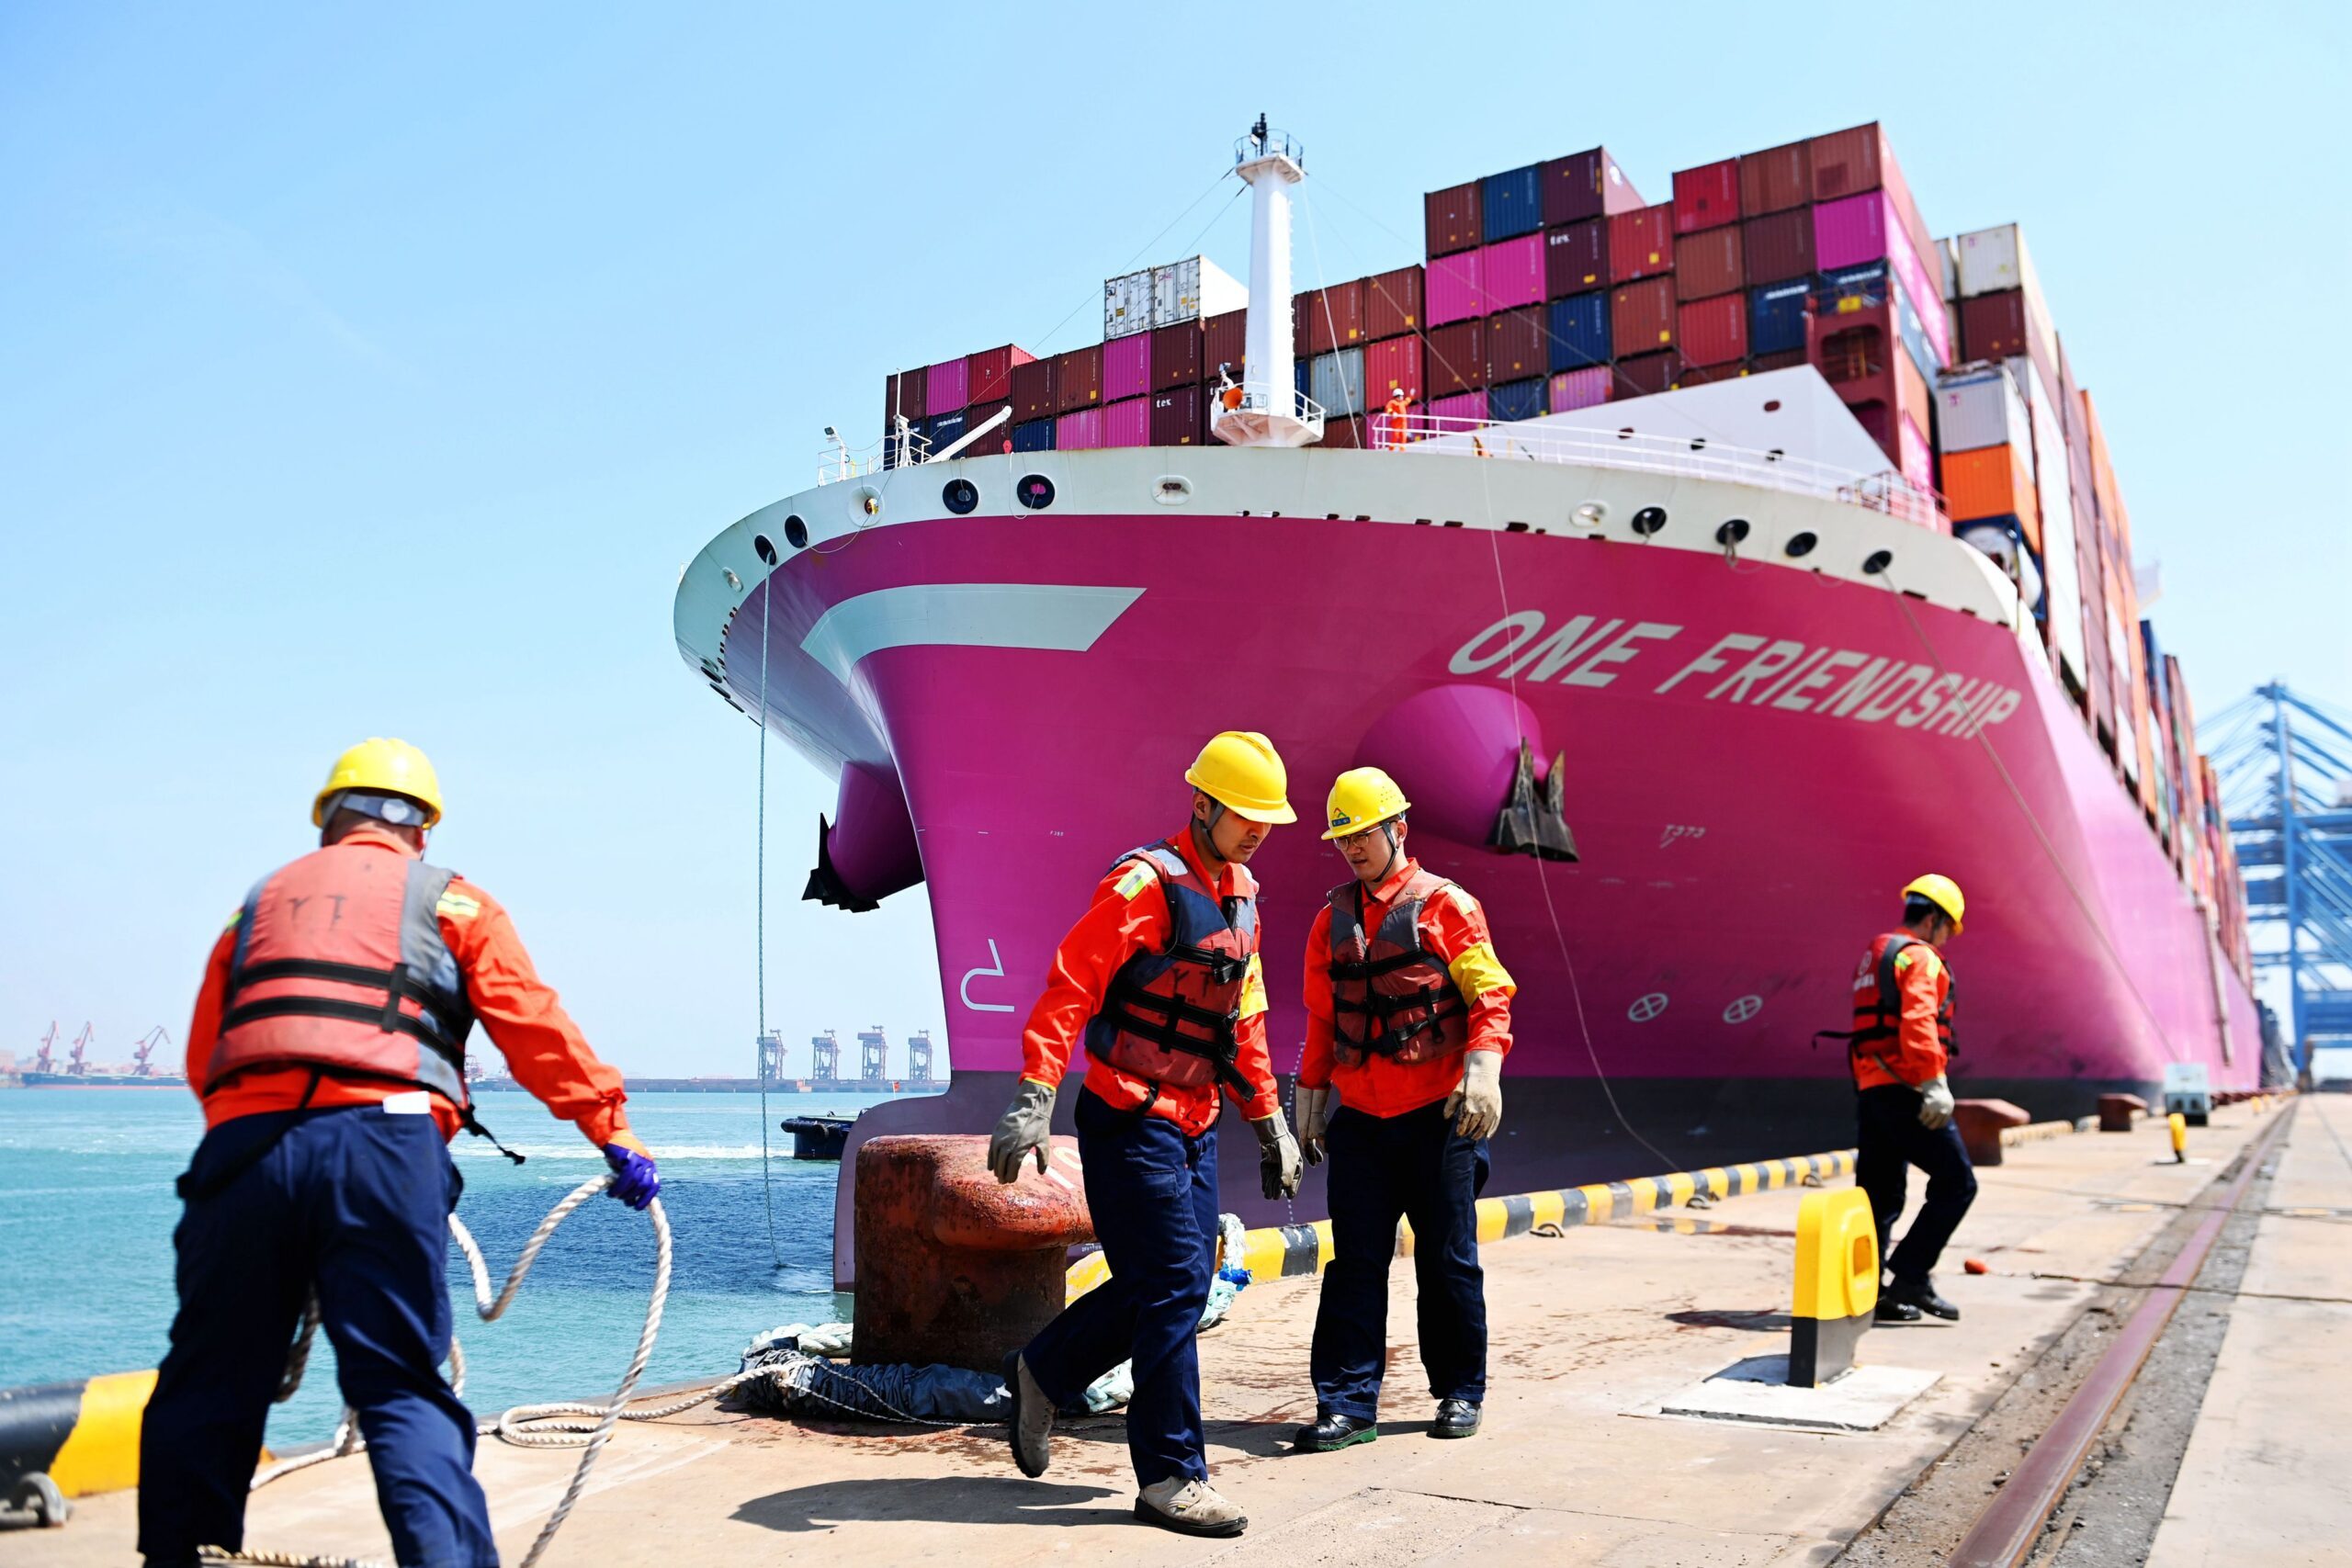 Dockworkers at China's Qingdao Port in Shandong province. The Middle East, Africa and Asia are forecast to propel global trade to $32.6 trillion by 2030